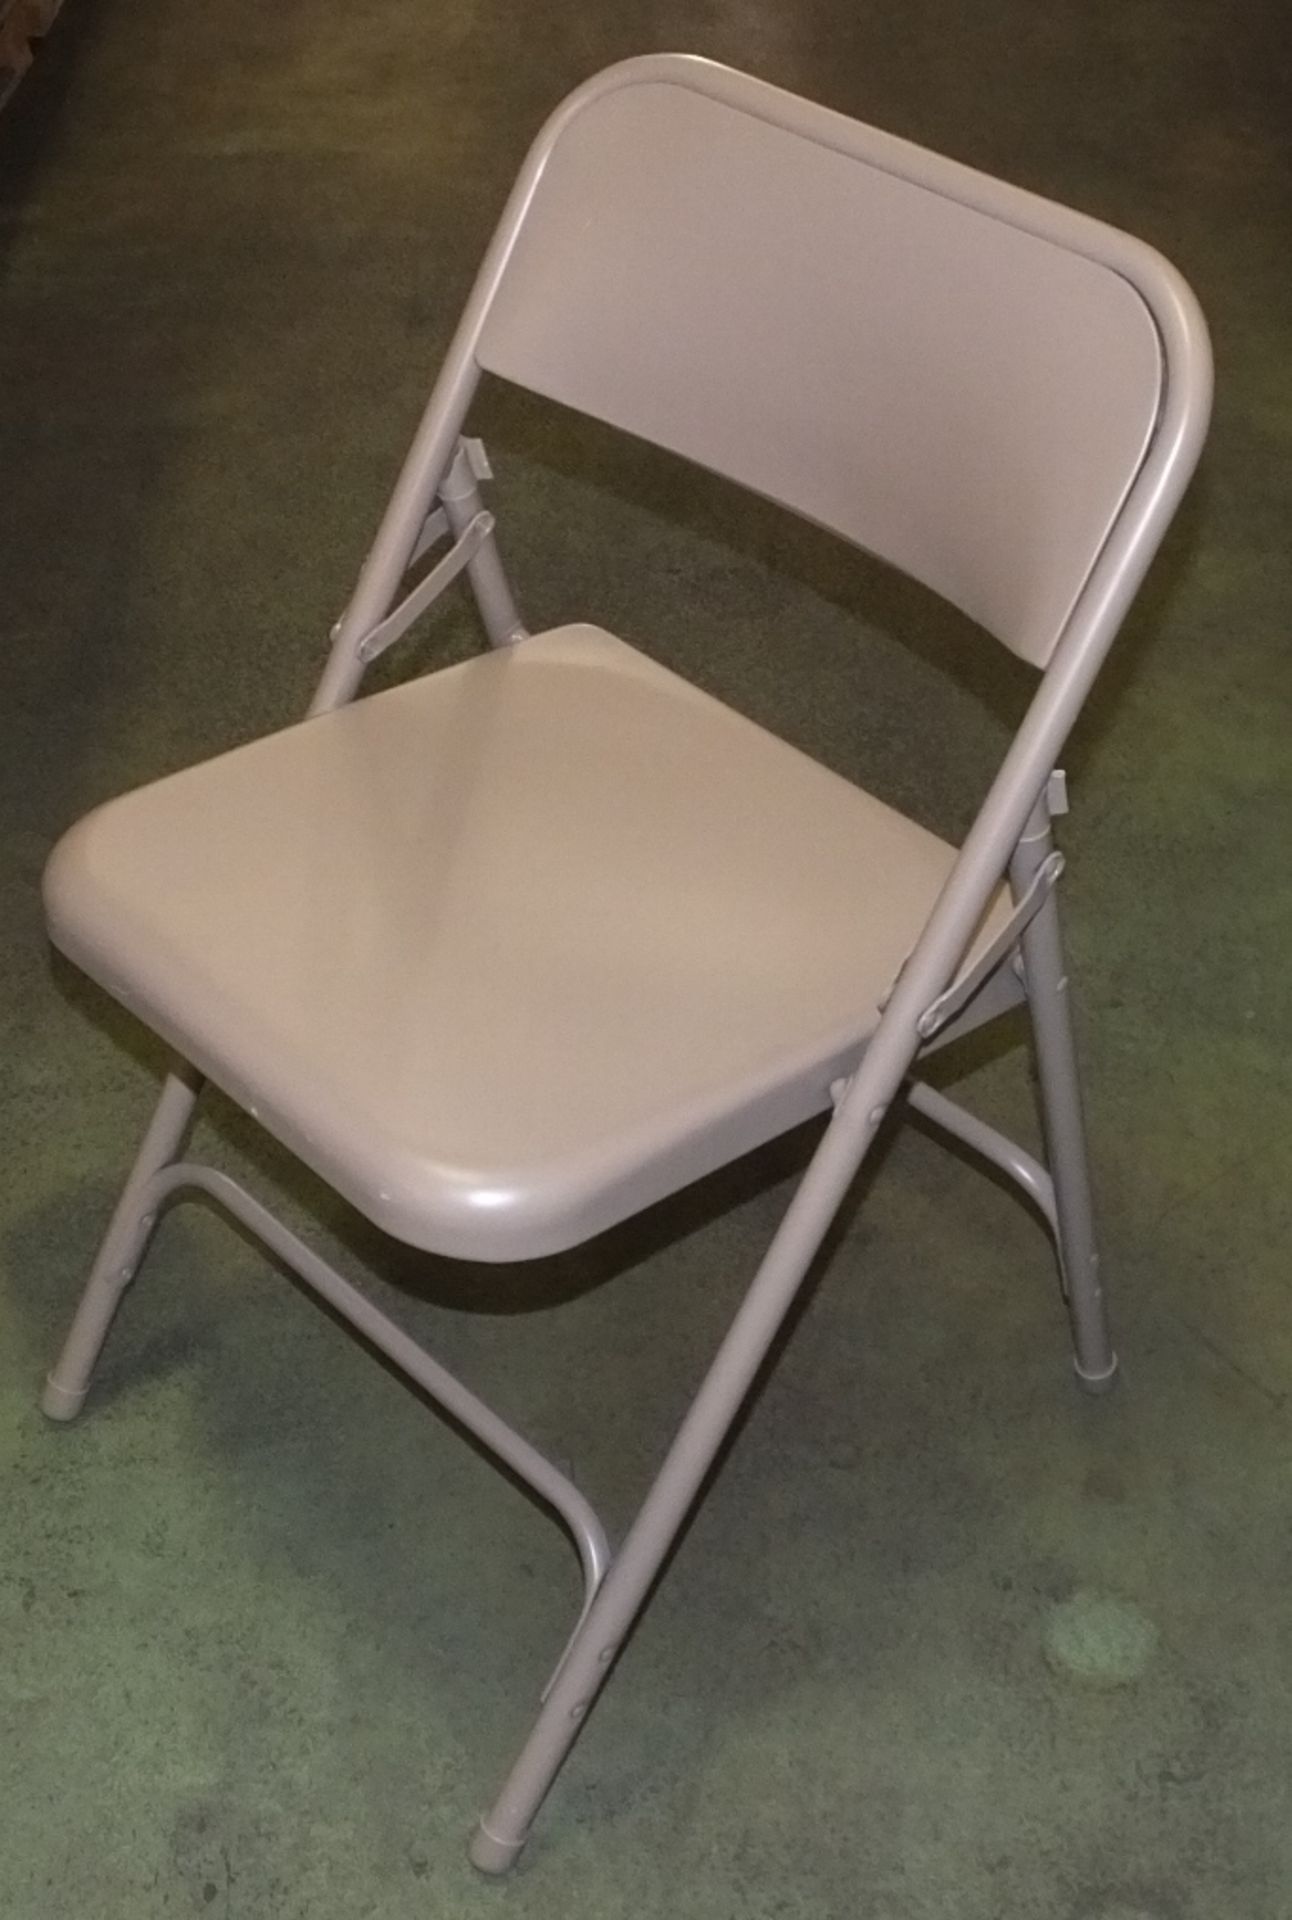 18x Folding Metal Chairs - Brown - Image 2 of 2